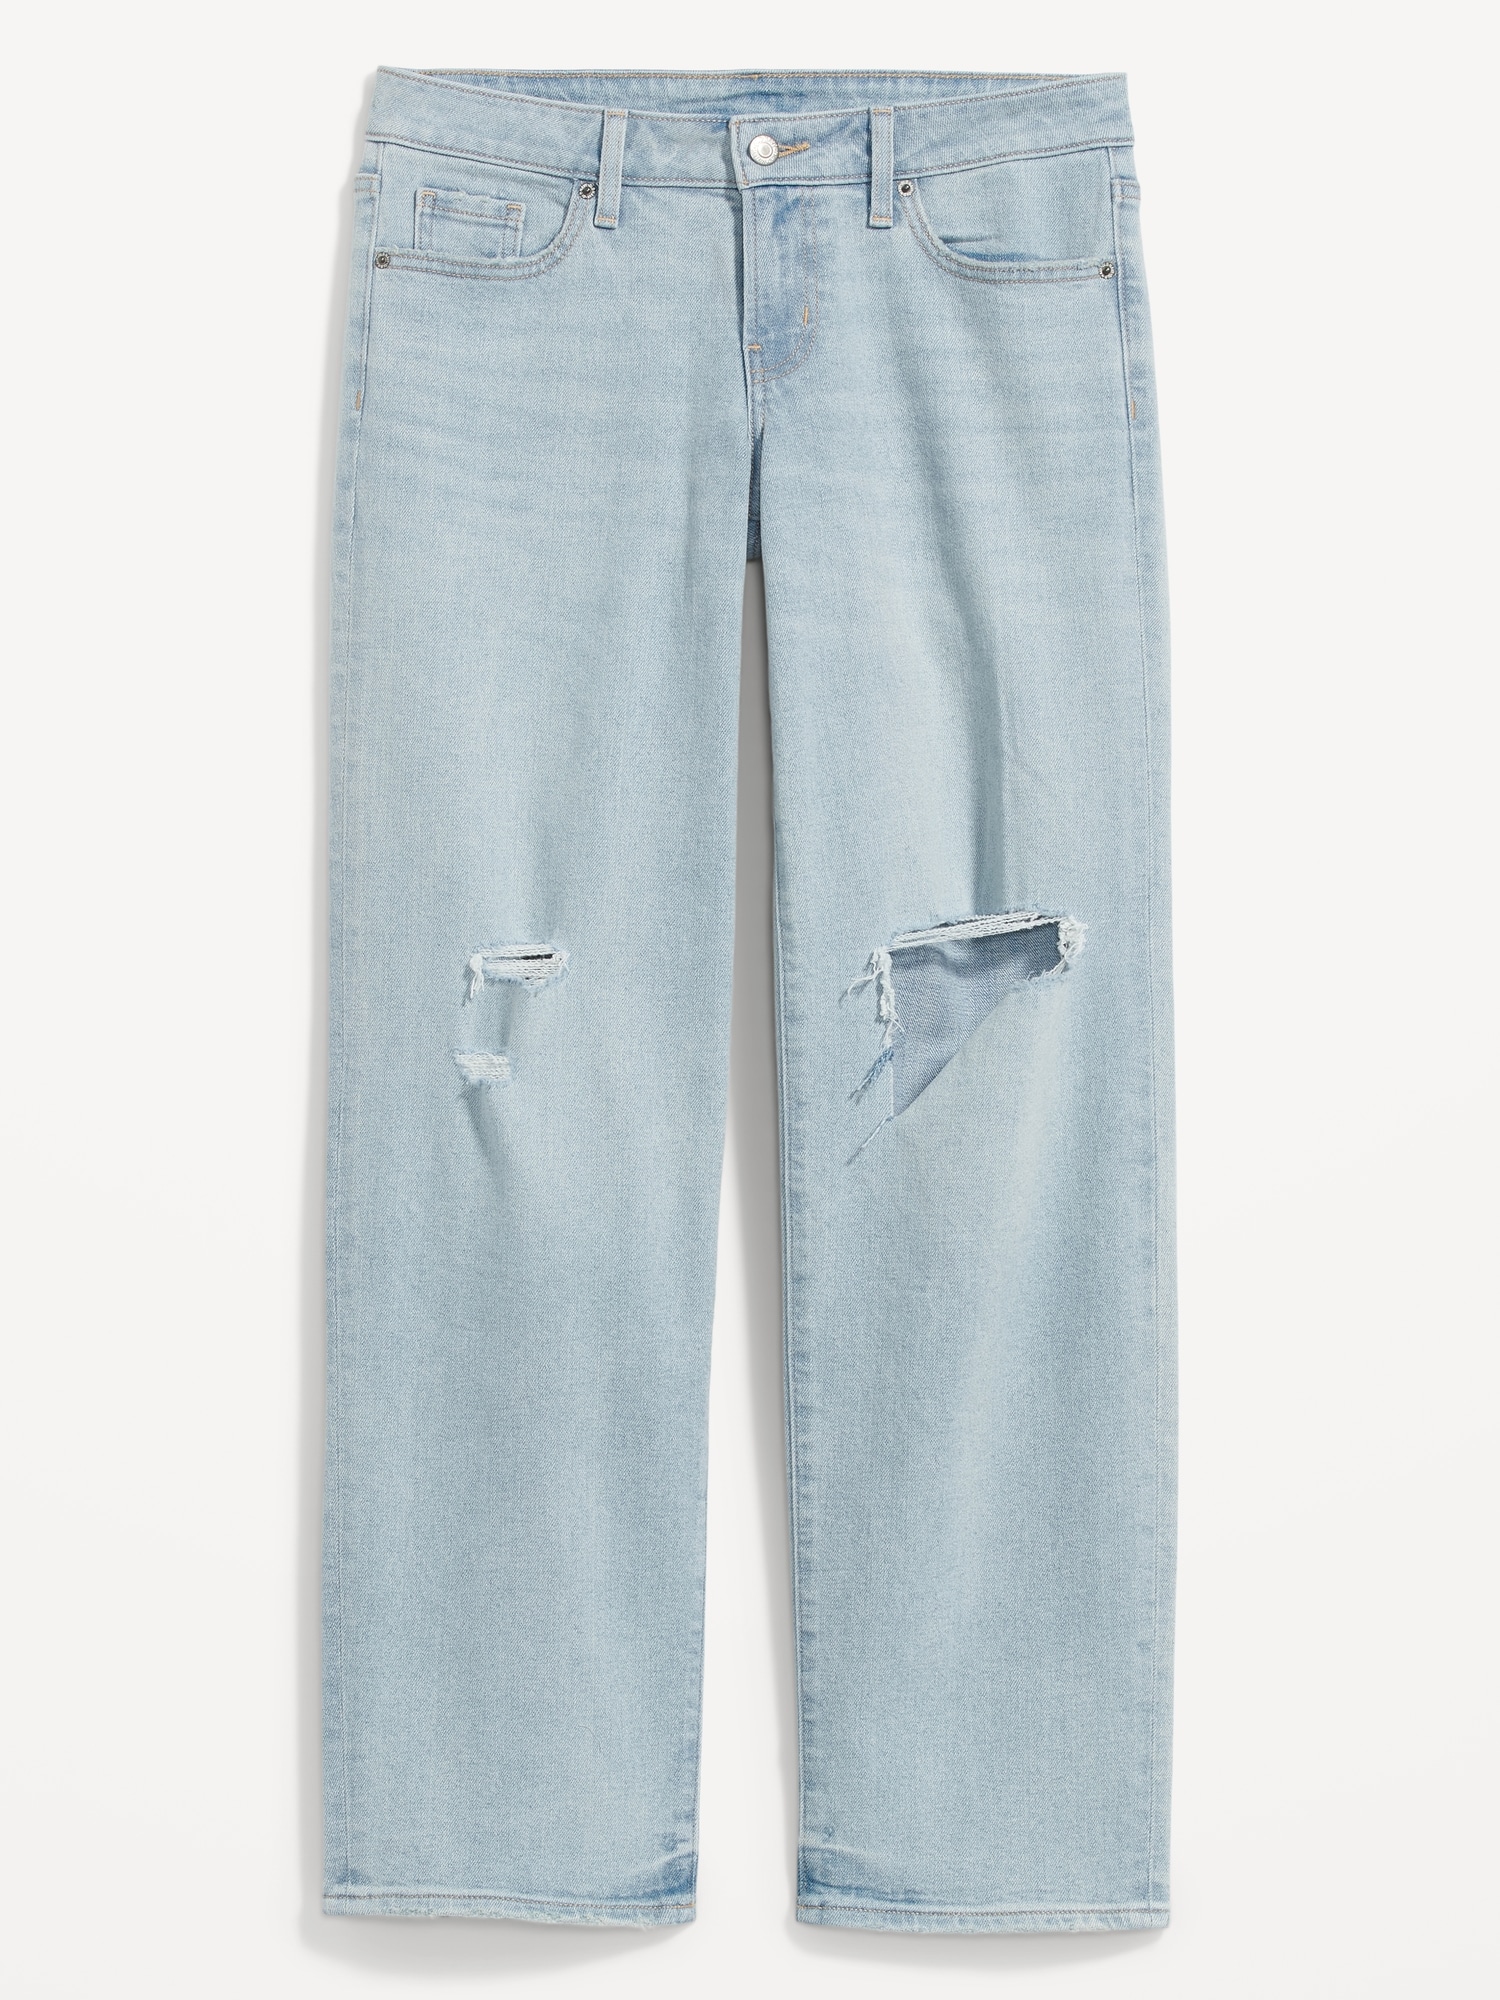 Low-Rise OG Loose Ripped Jeans for Women | Old Navy